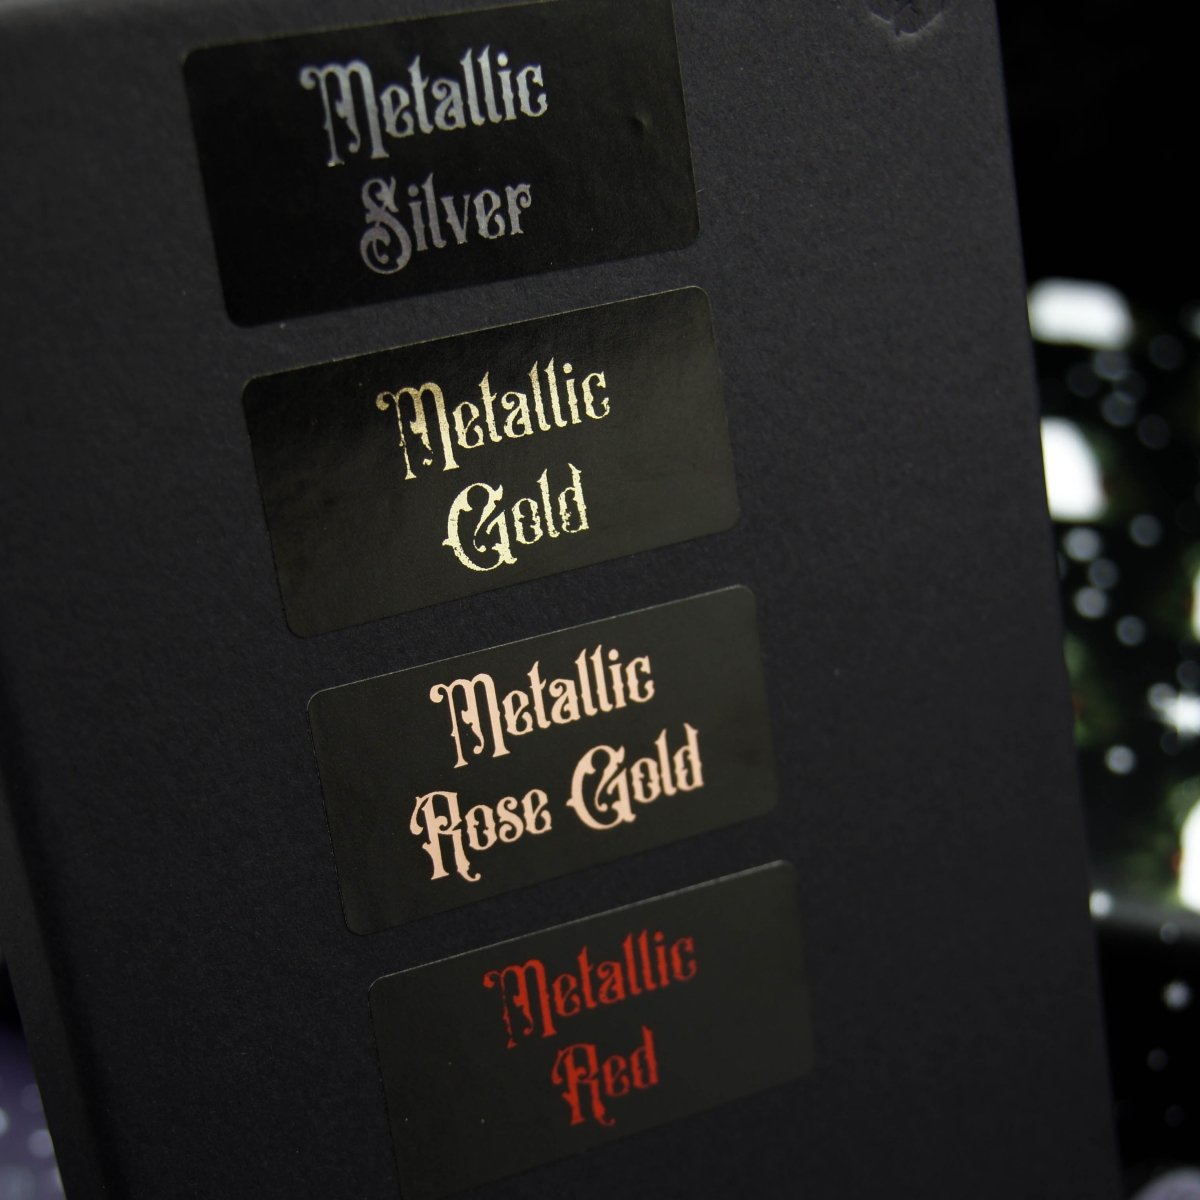 Crystal Ball Stickers | Business Stickers - The Gothic Stationery Company - Business Stationery